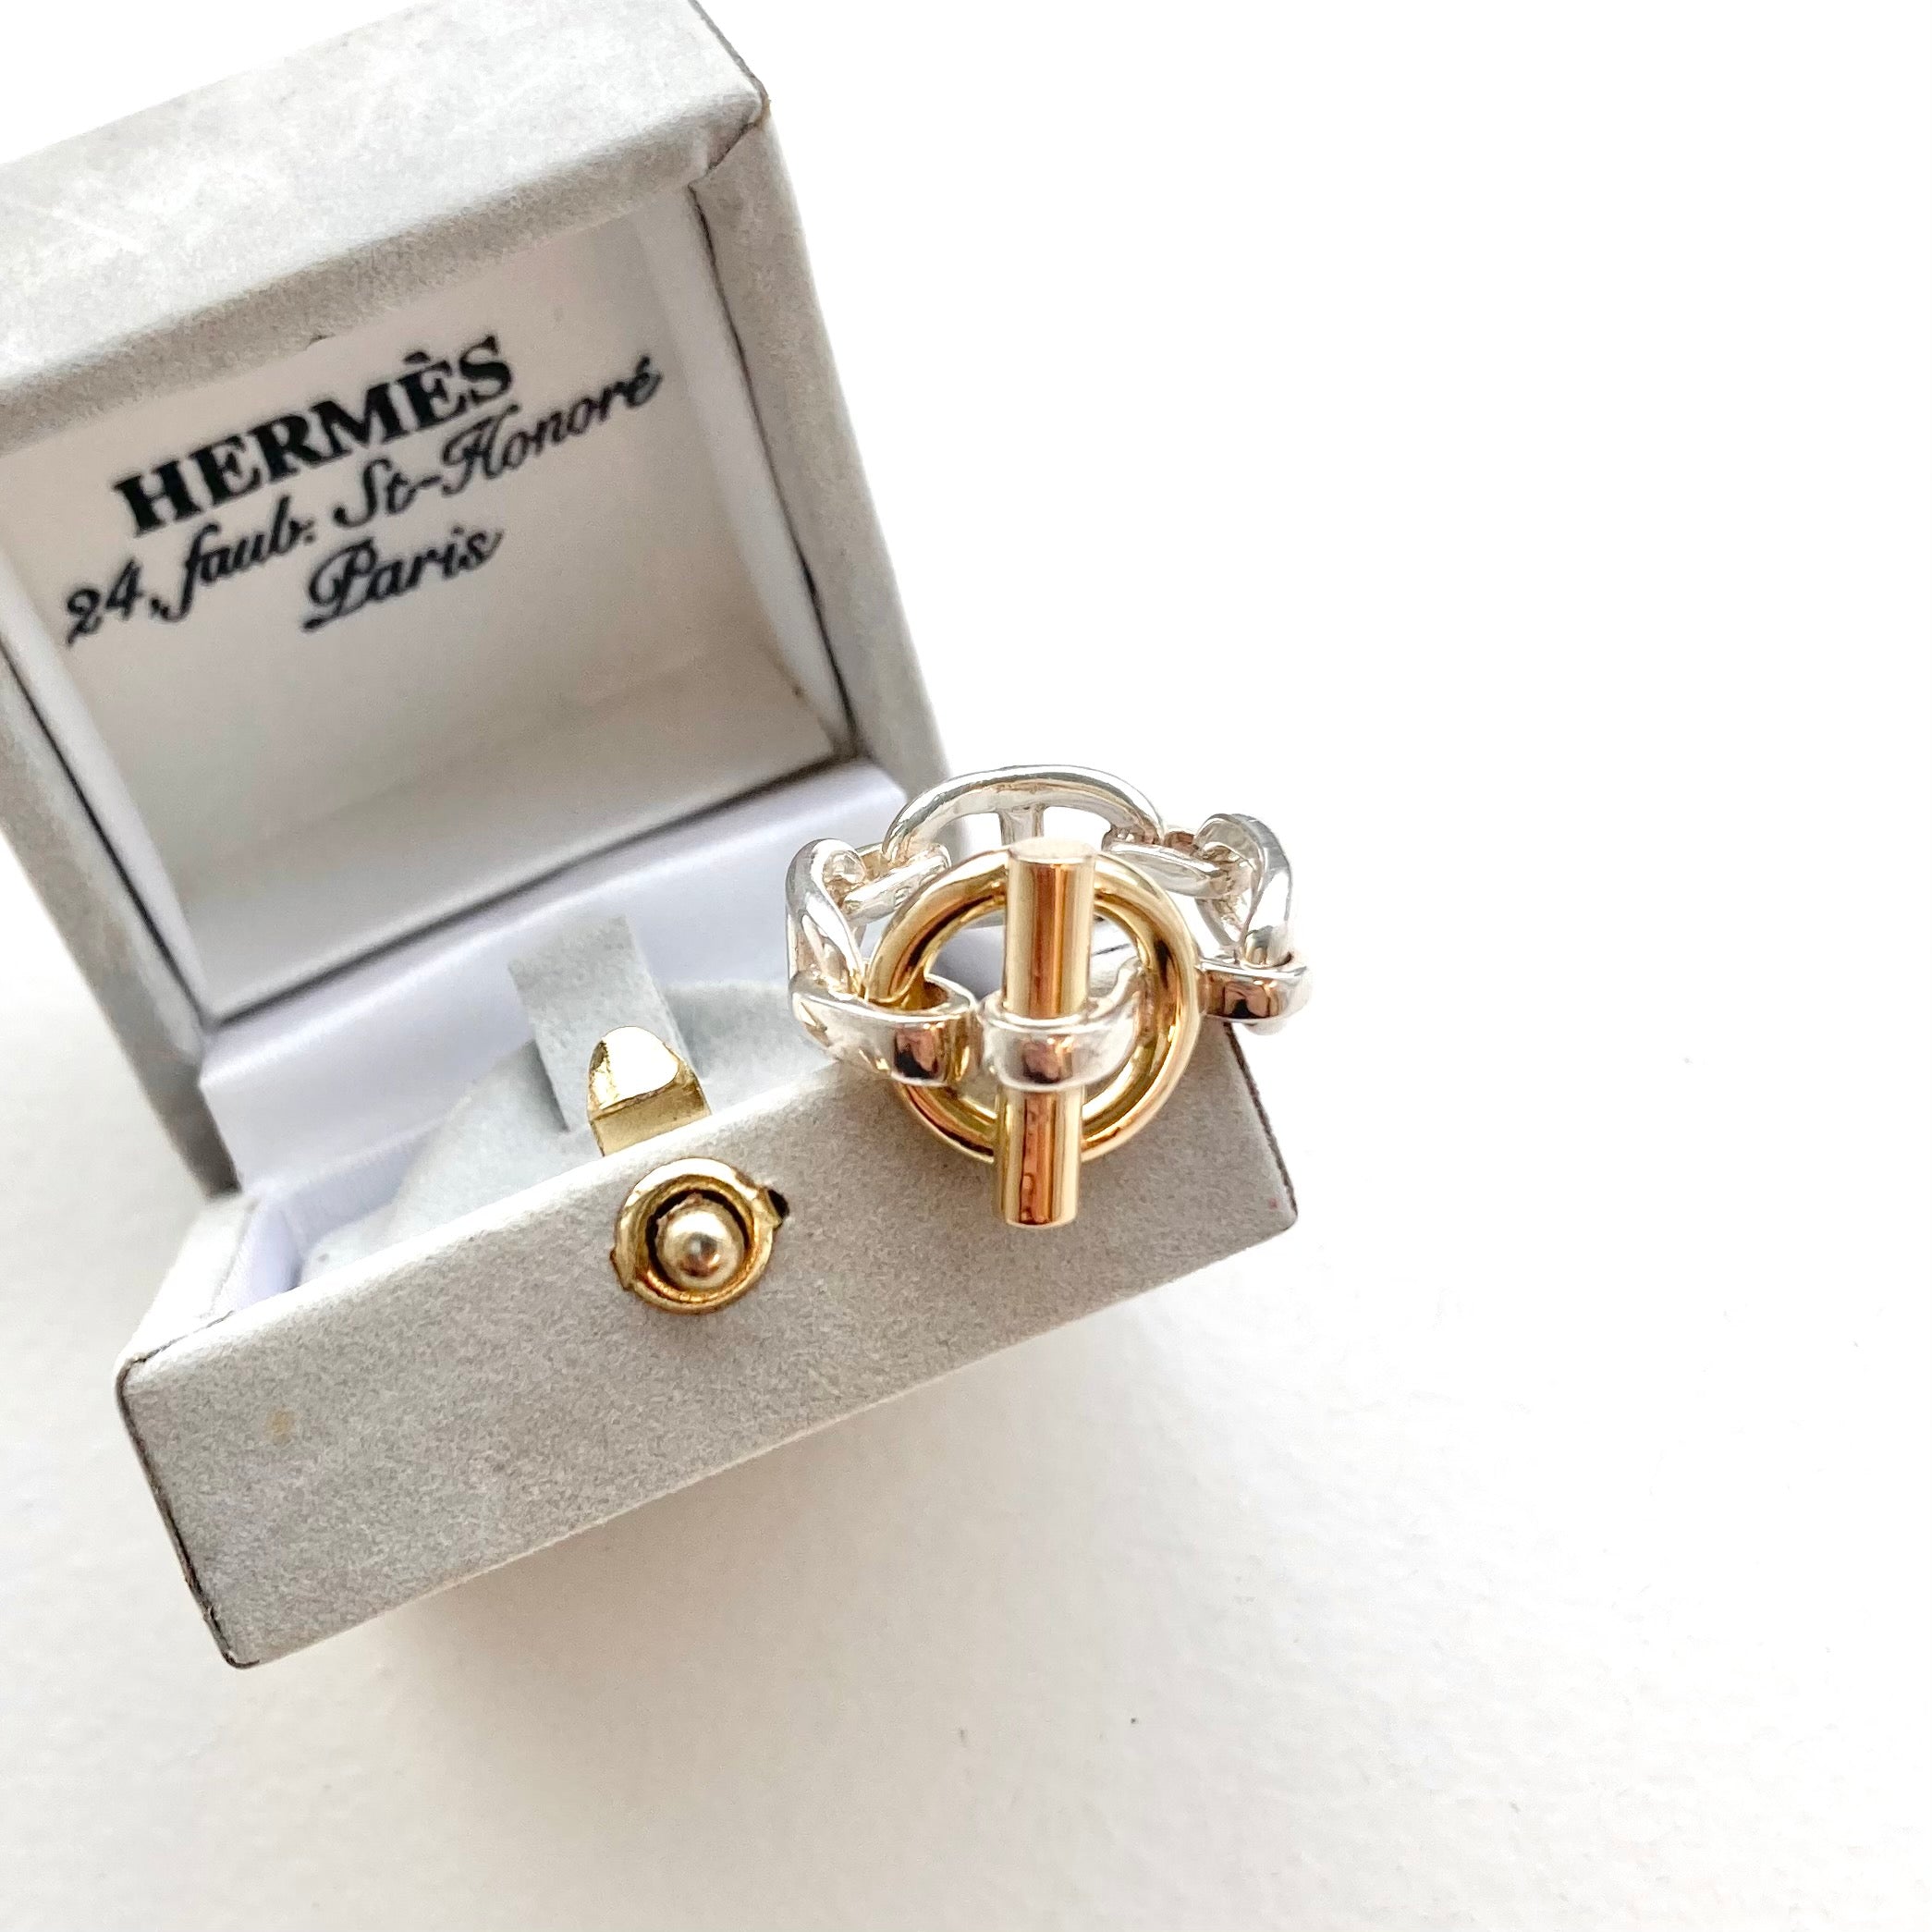 60s HERMES Chaine dunkle Ring vintage エルメス シェーヌダンクル 